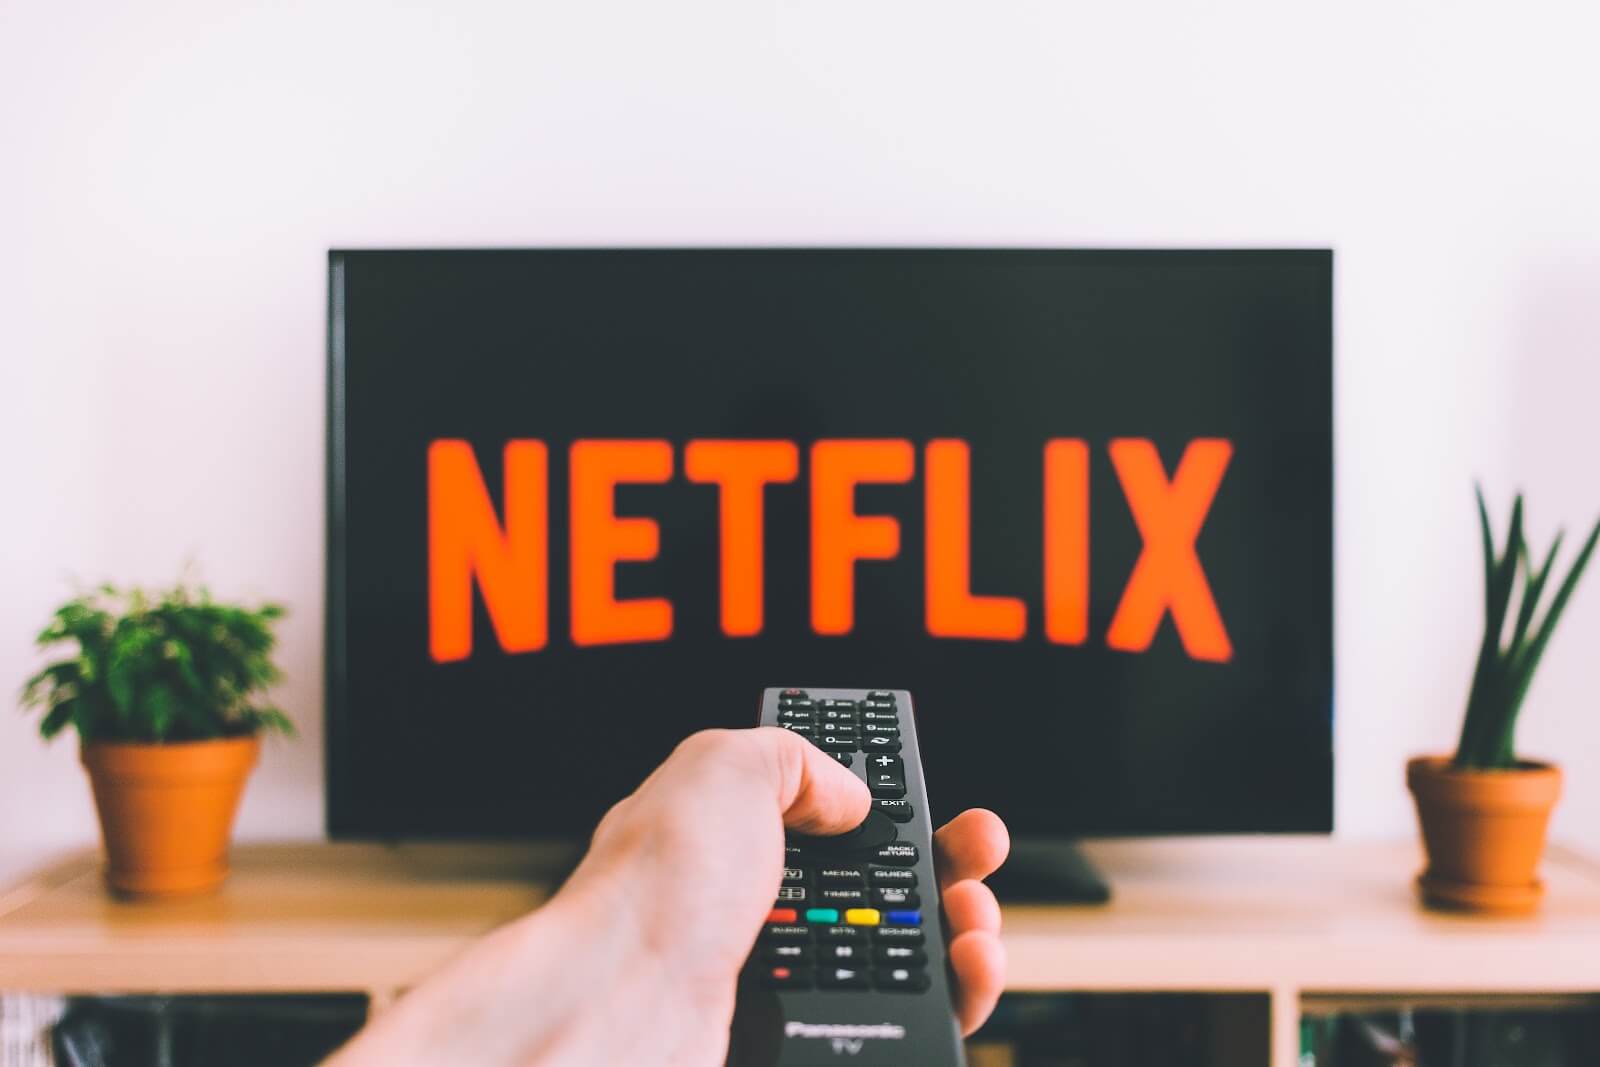 Online jobs: Remote pointing at TV screen with Netflix logo